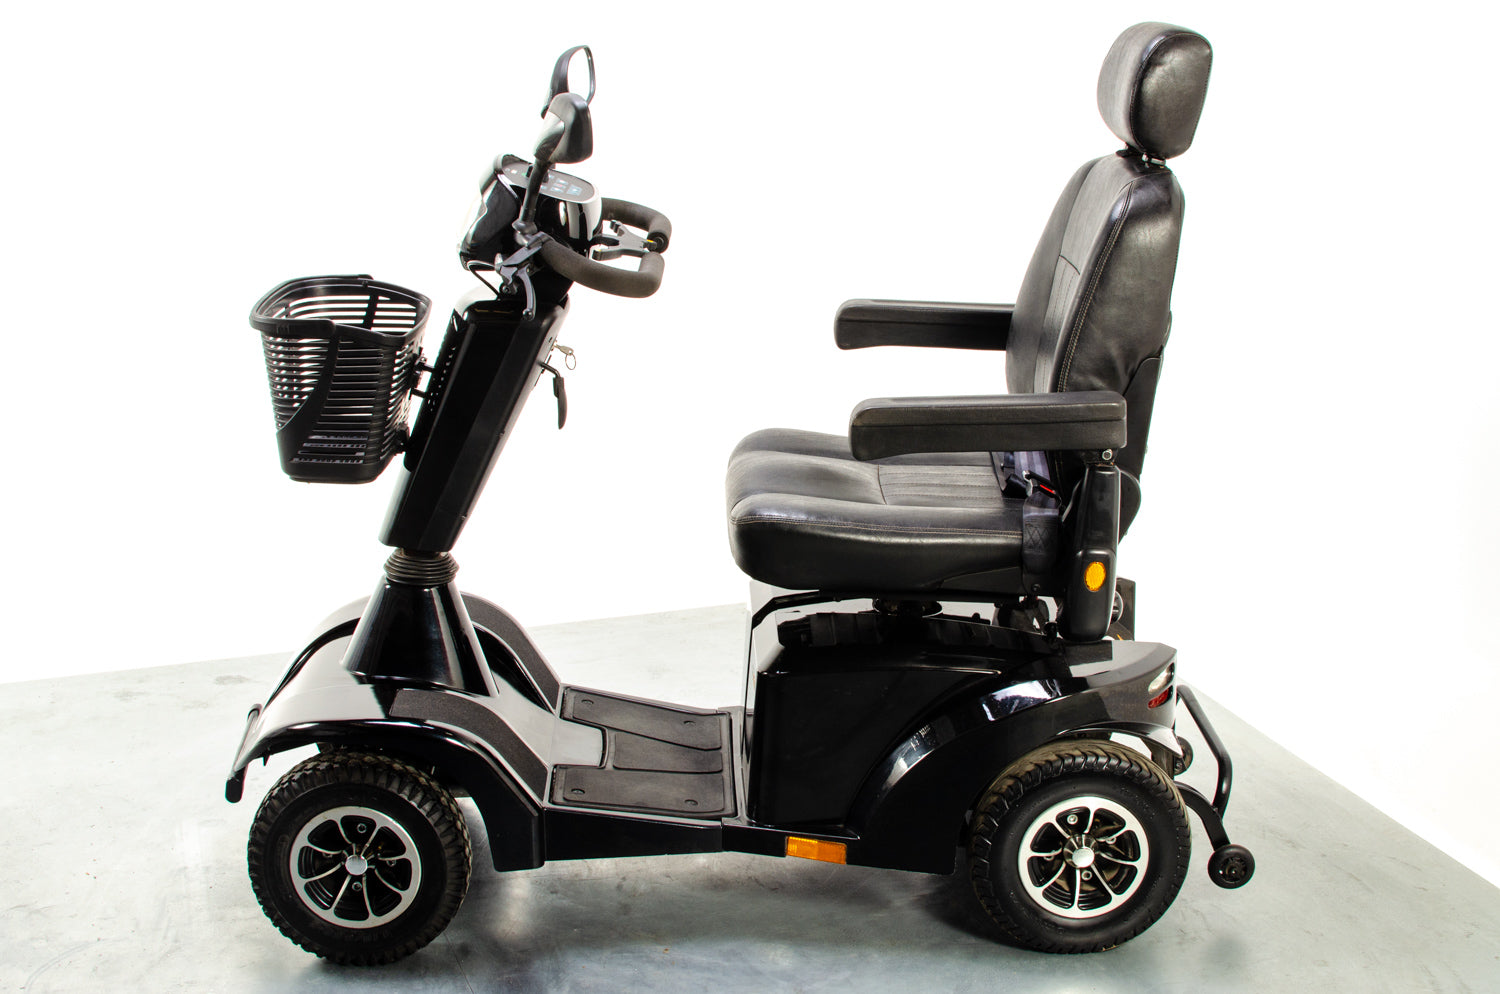 Sterling S700 Used Mobility Scooter Large 8mpoh All-Terrain Sunrise Medical